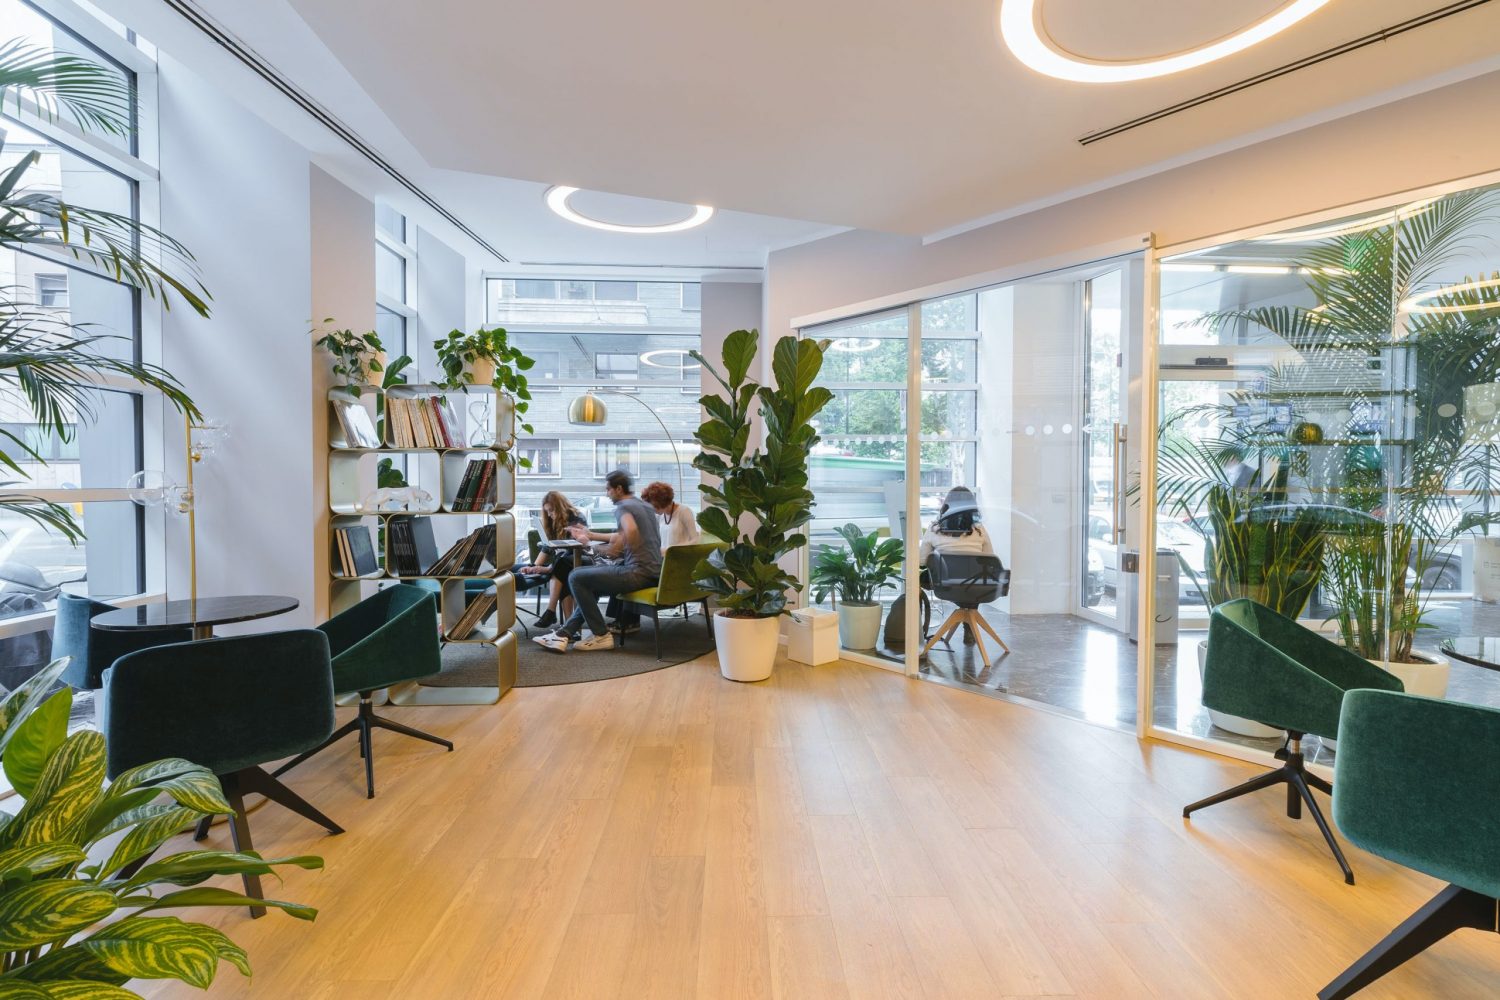 Office Interior with plants